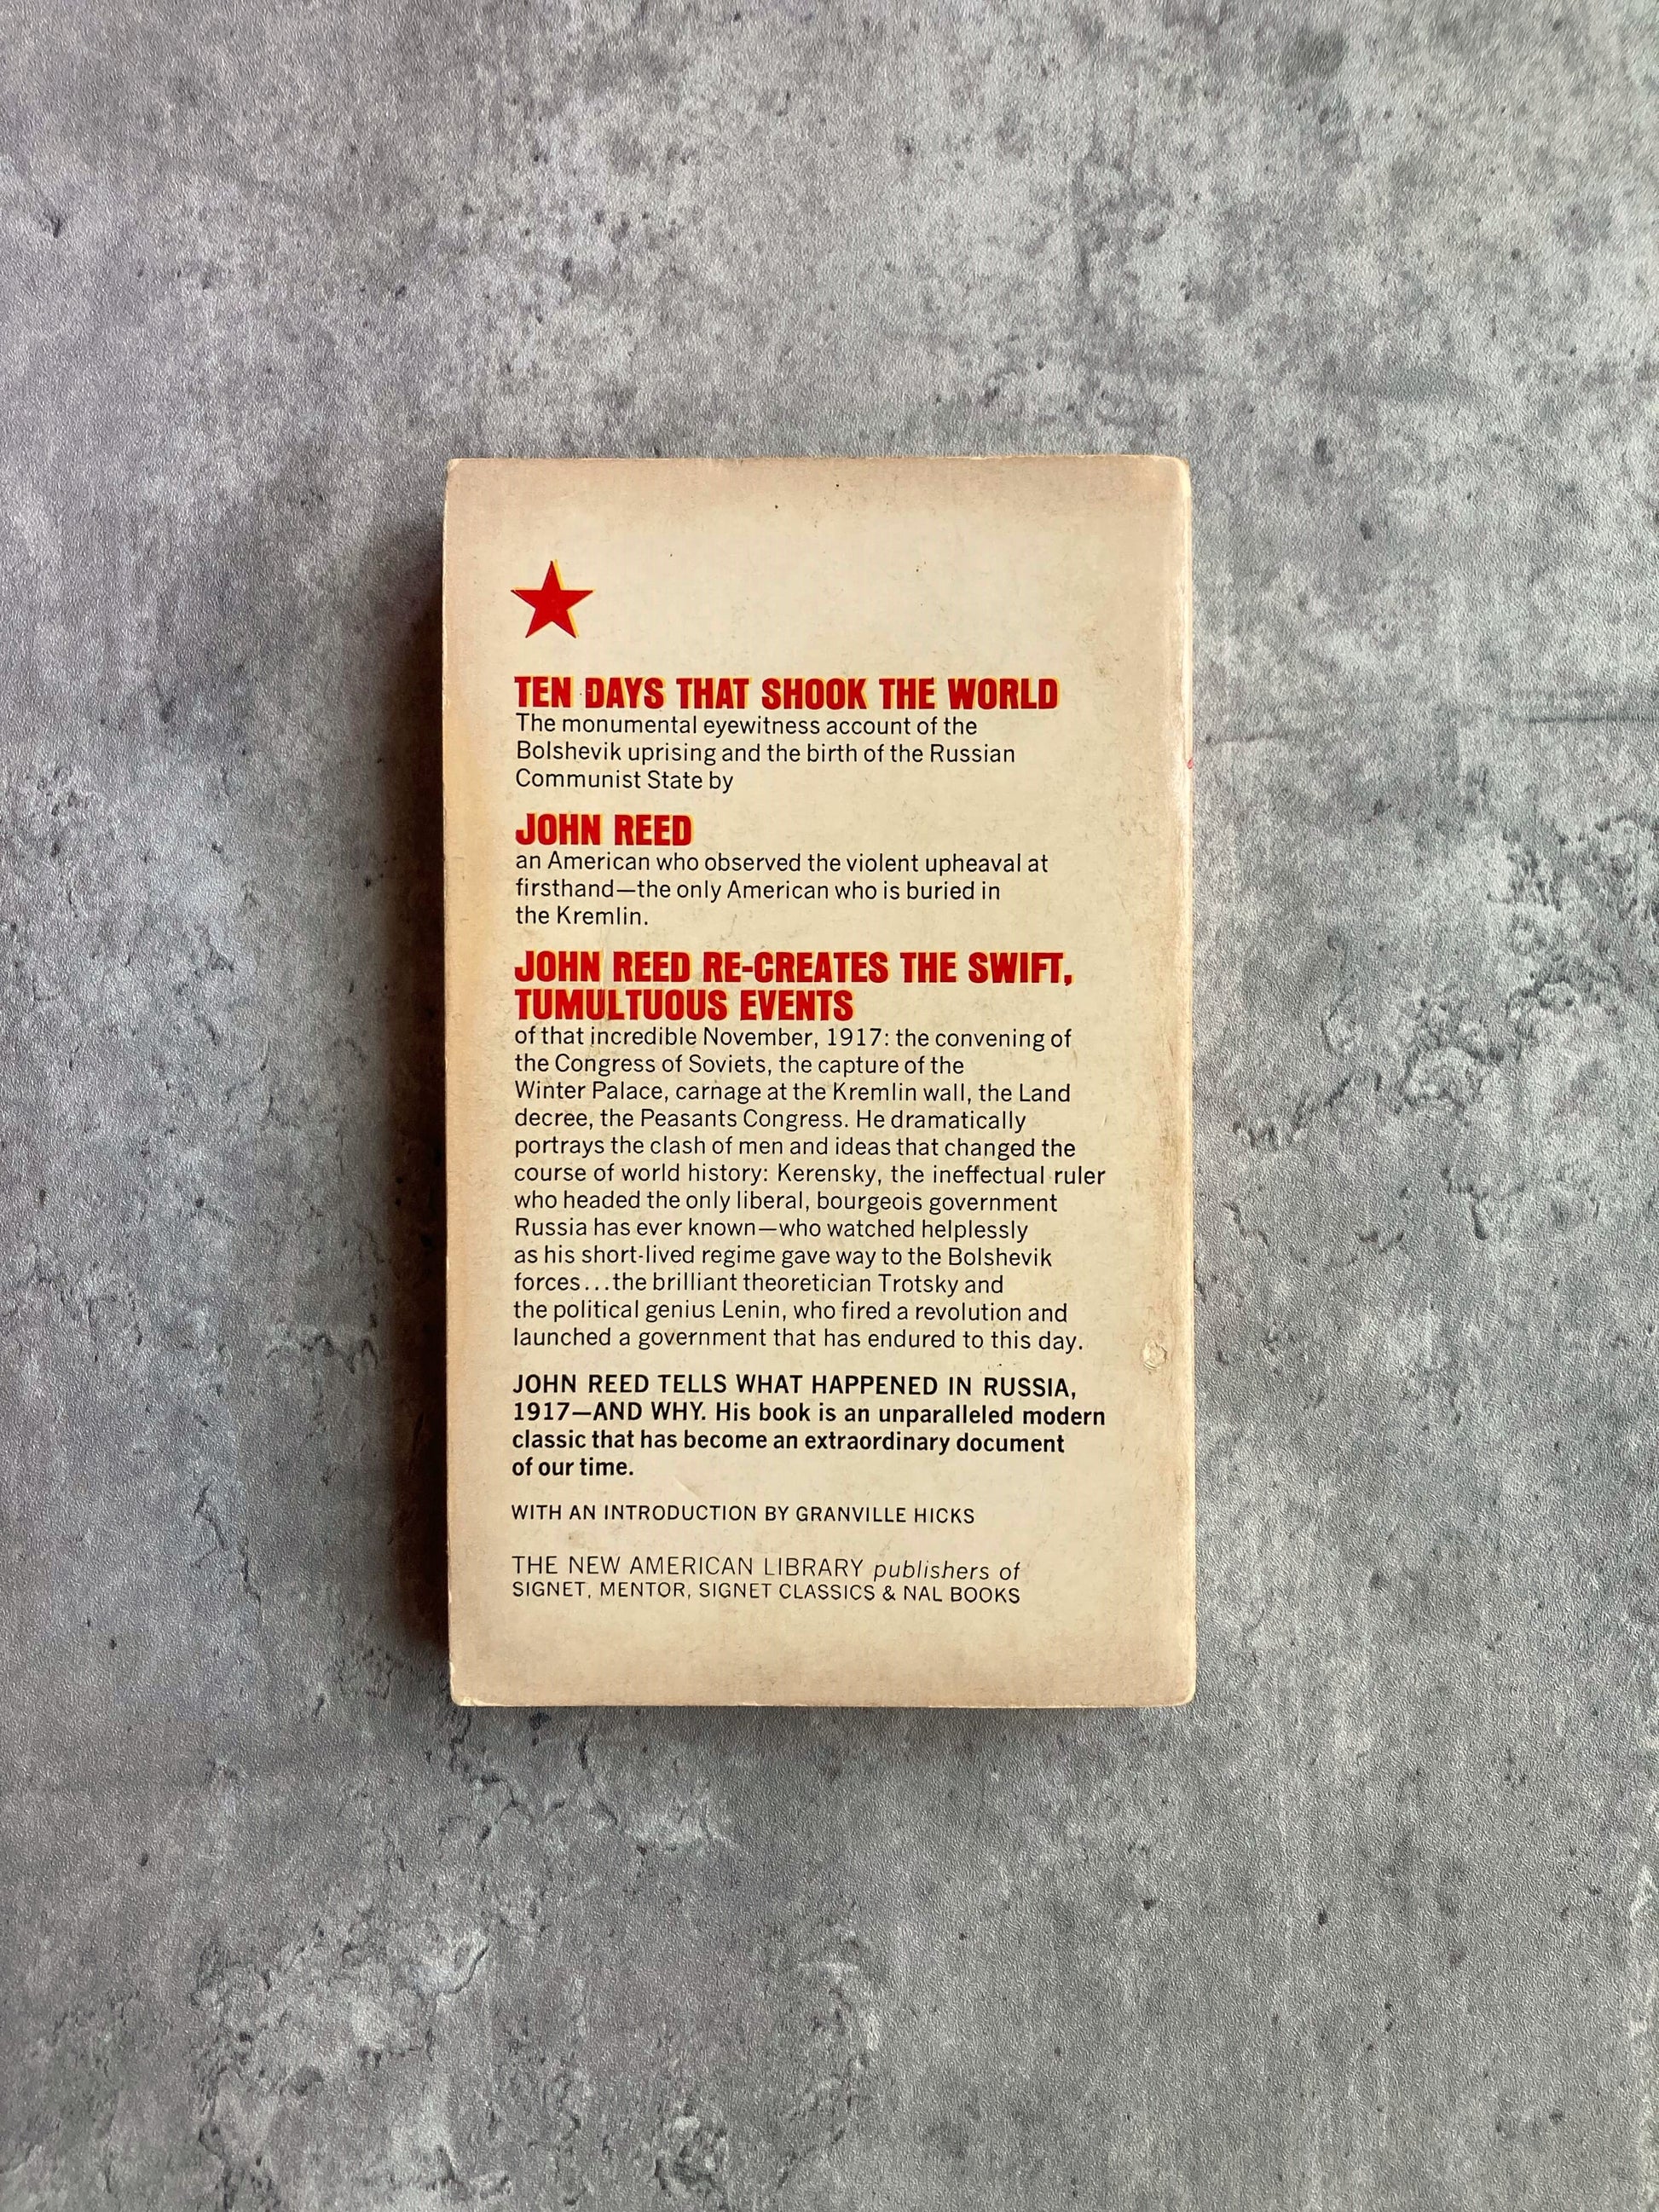 Ten Days That Shook the World book by John Reed. Shop all new and used books online with The Stone Circle, the only online bookstore in Los Angeles, California.